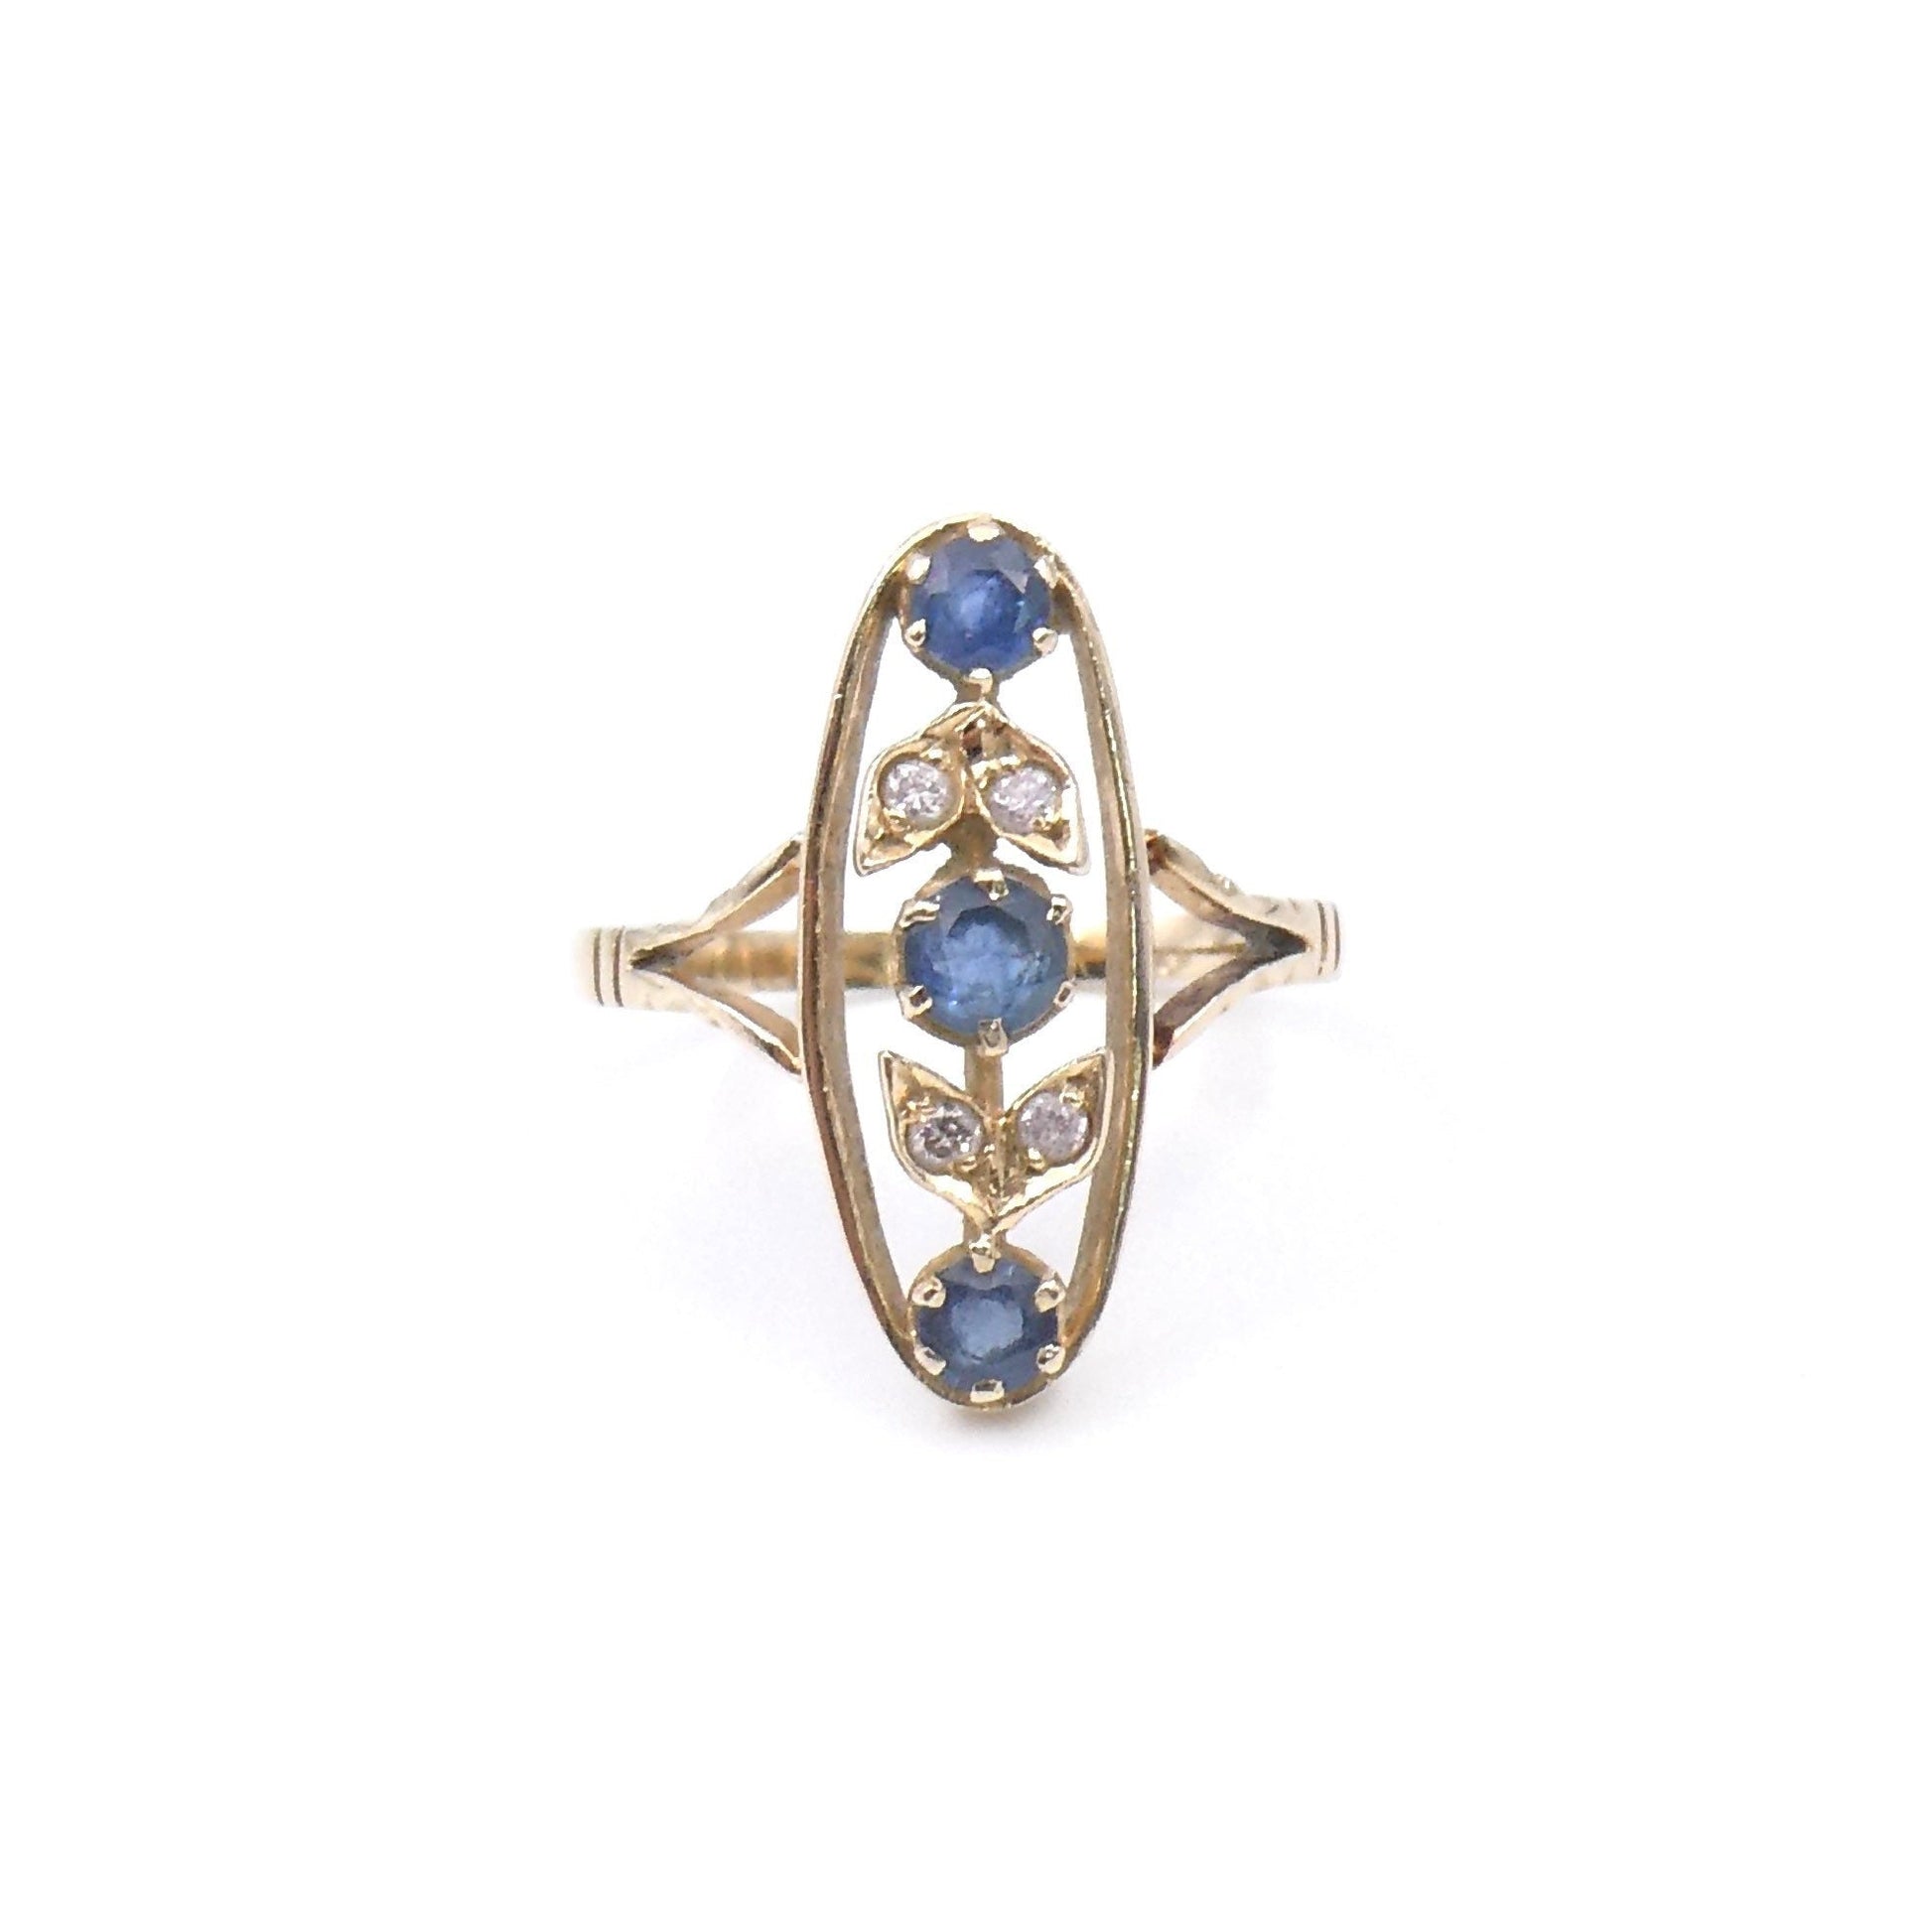 Sapphire diamond navette shaped ring, sapphire ring with diamond set leaf motifs. - Collected